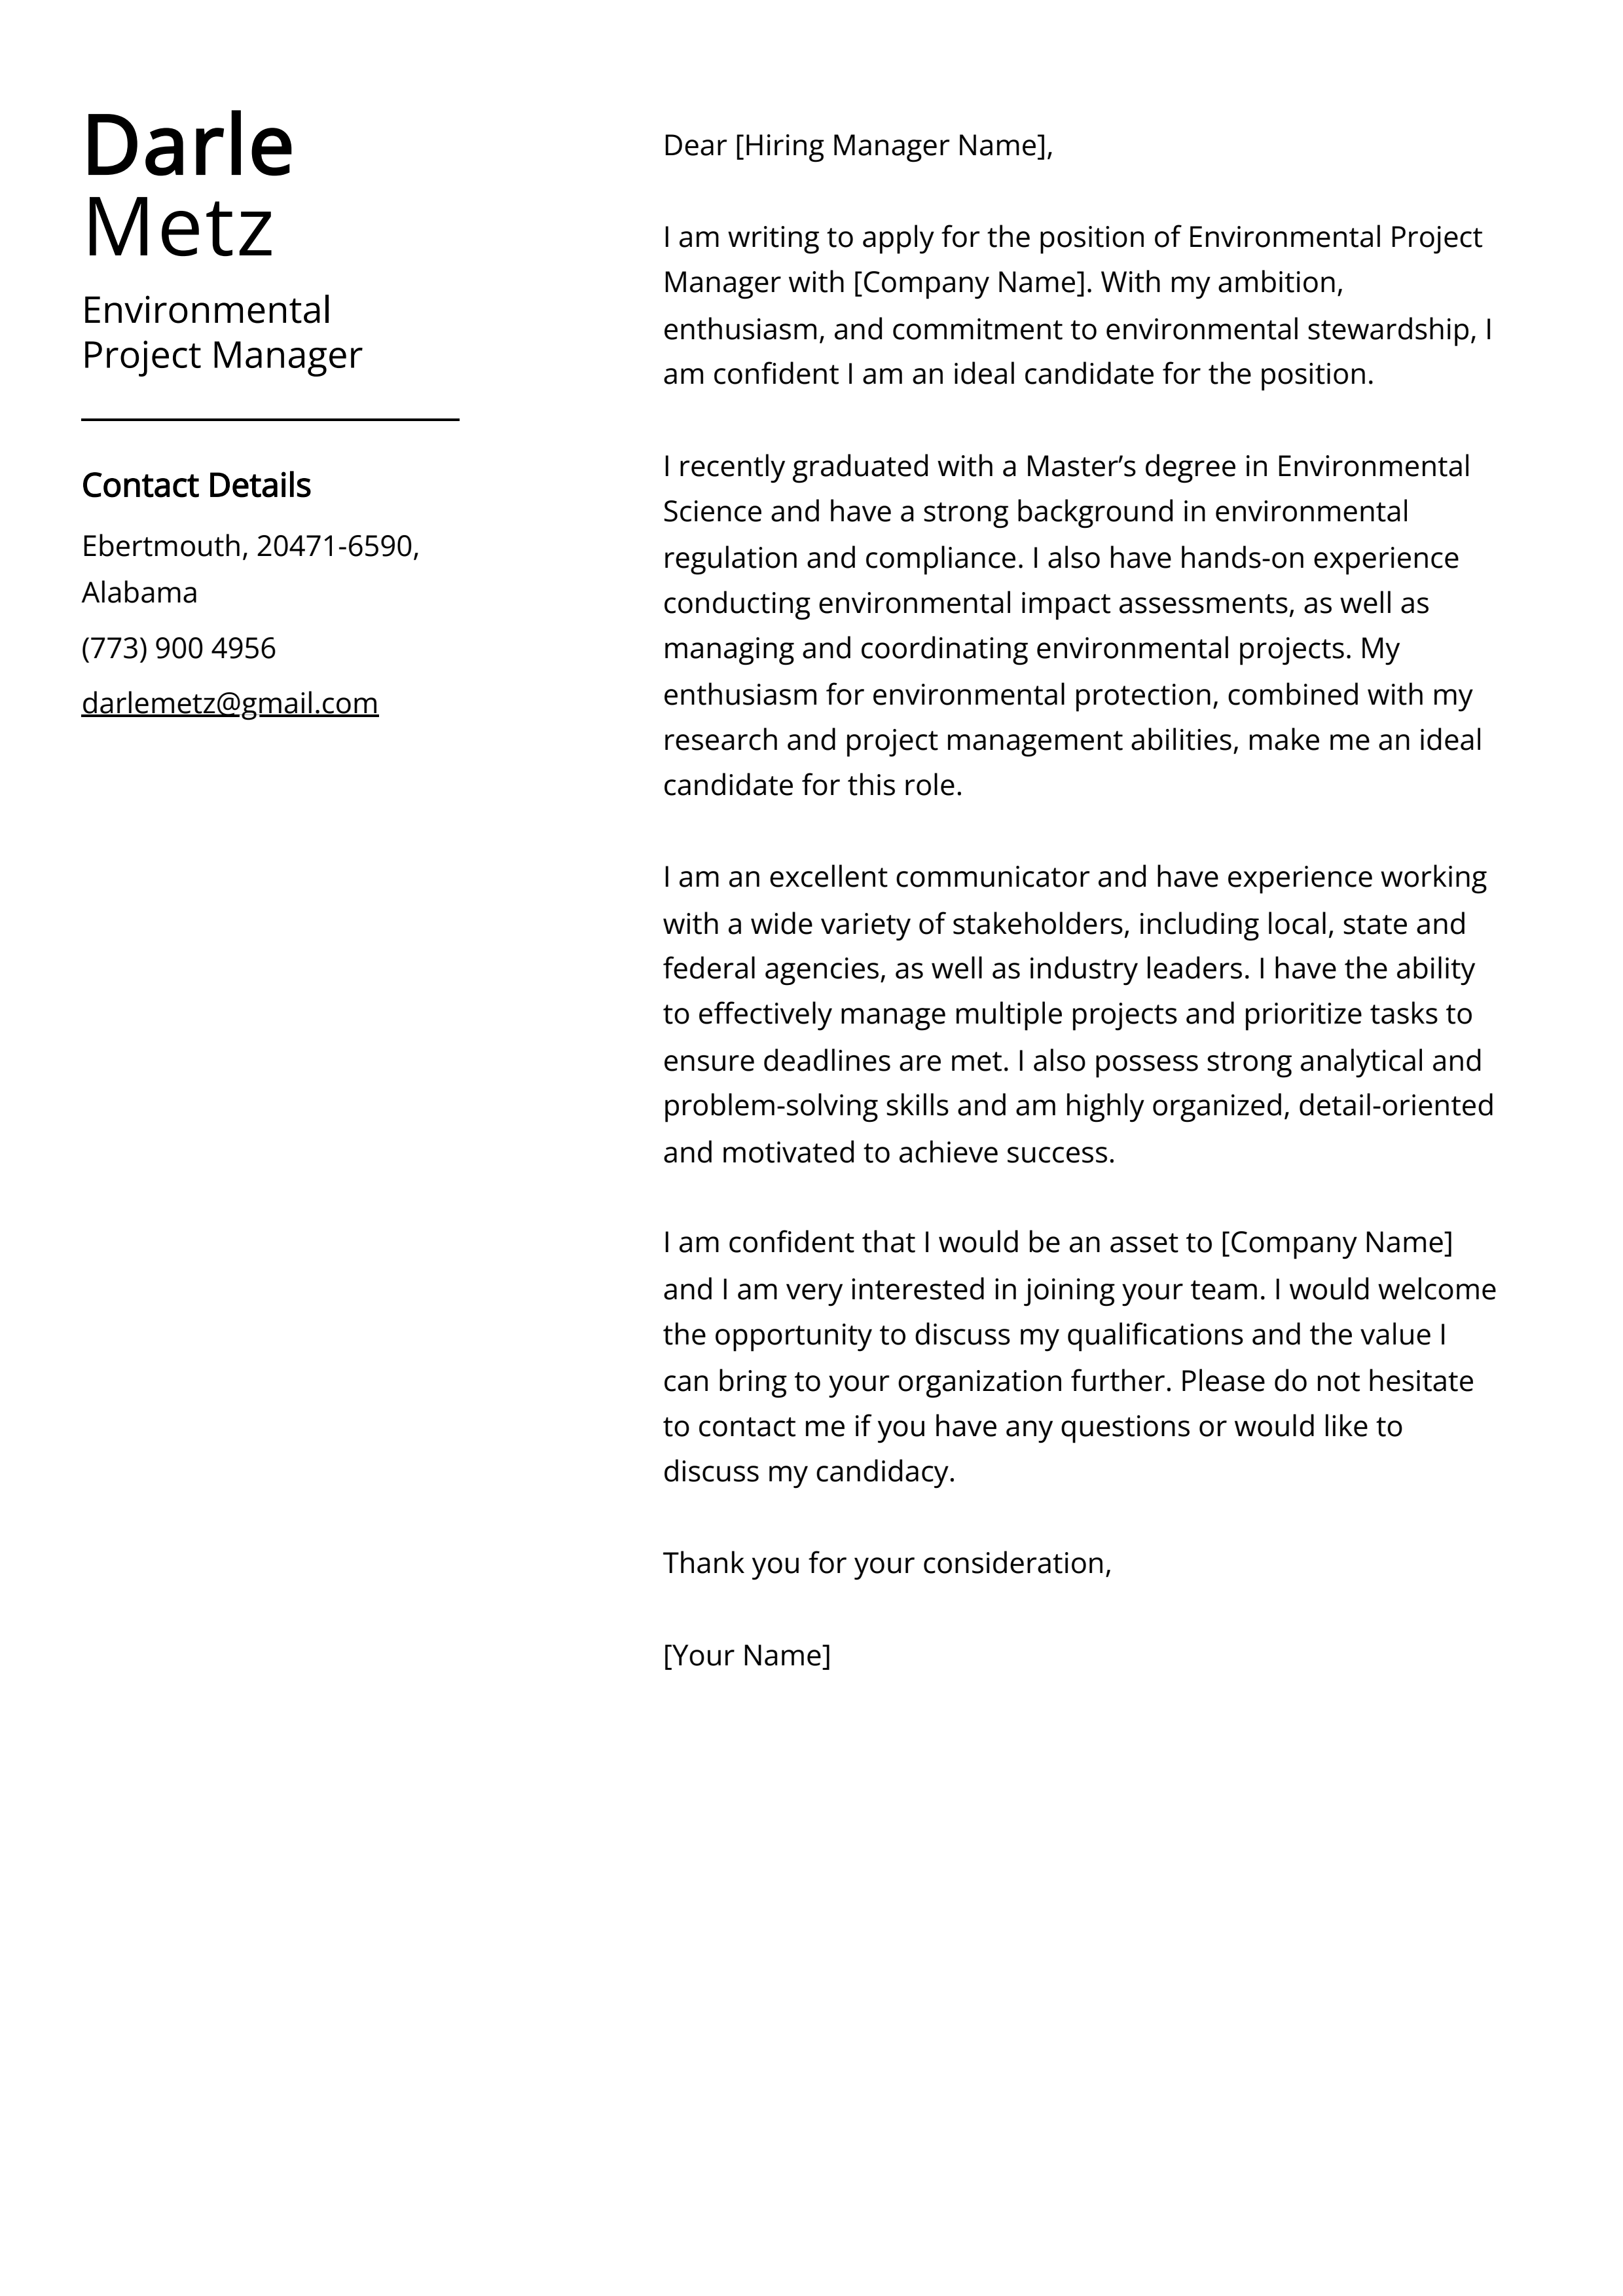 Environmental Project Manager Cover Letter Example